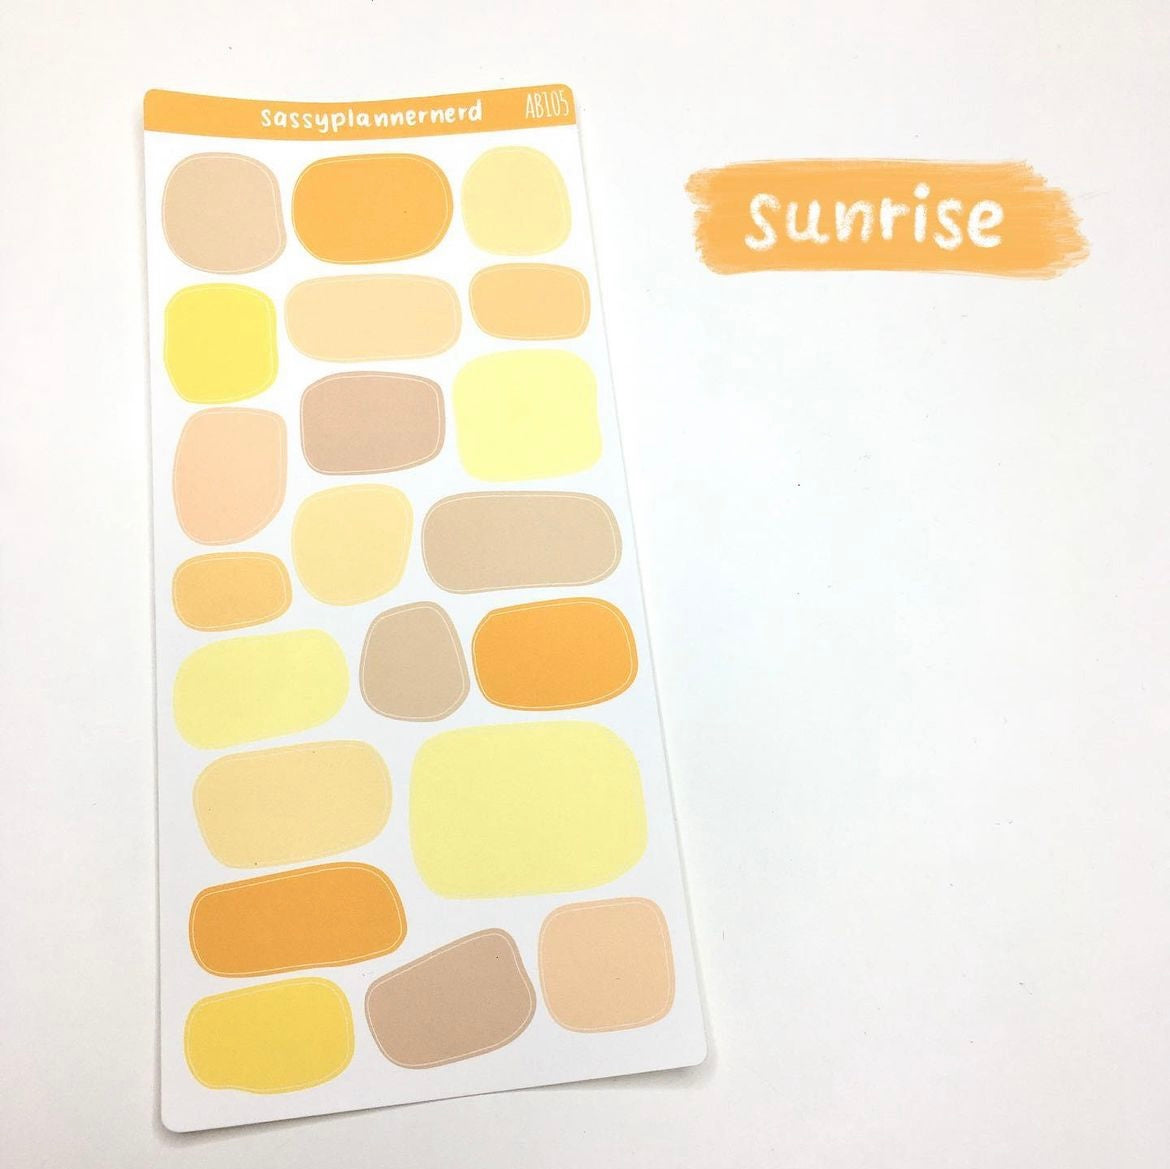 Sunrise | Abstract color swatches